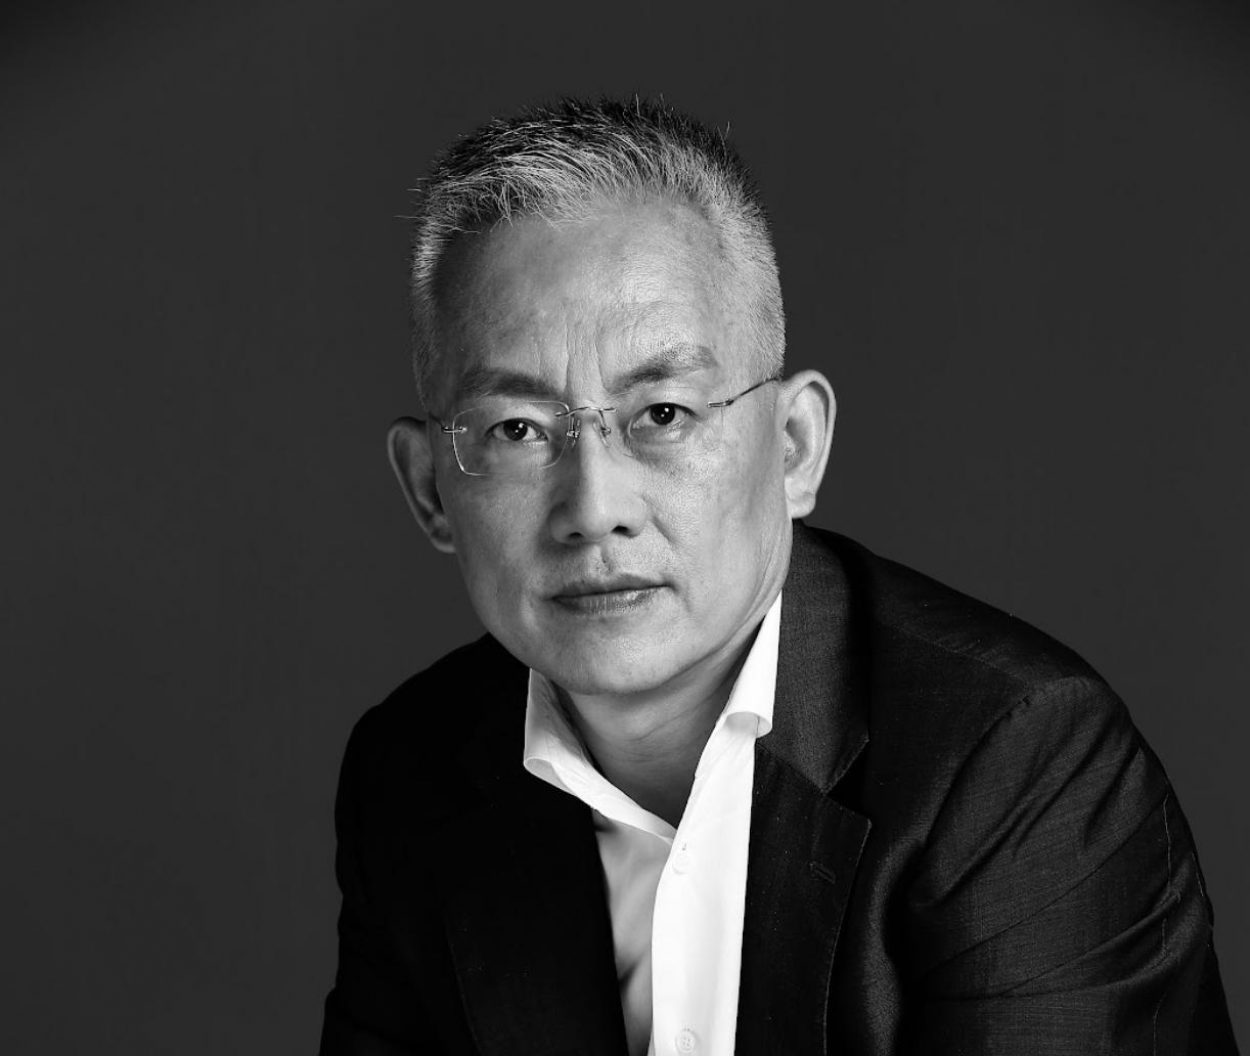 Black and white portrait of MIT alum Qian Wang wearing glasses and a black and white suit